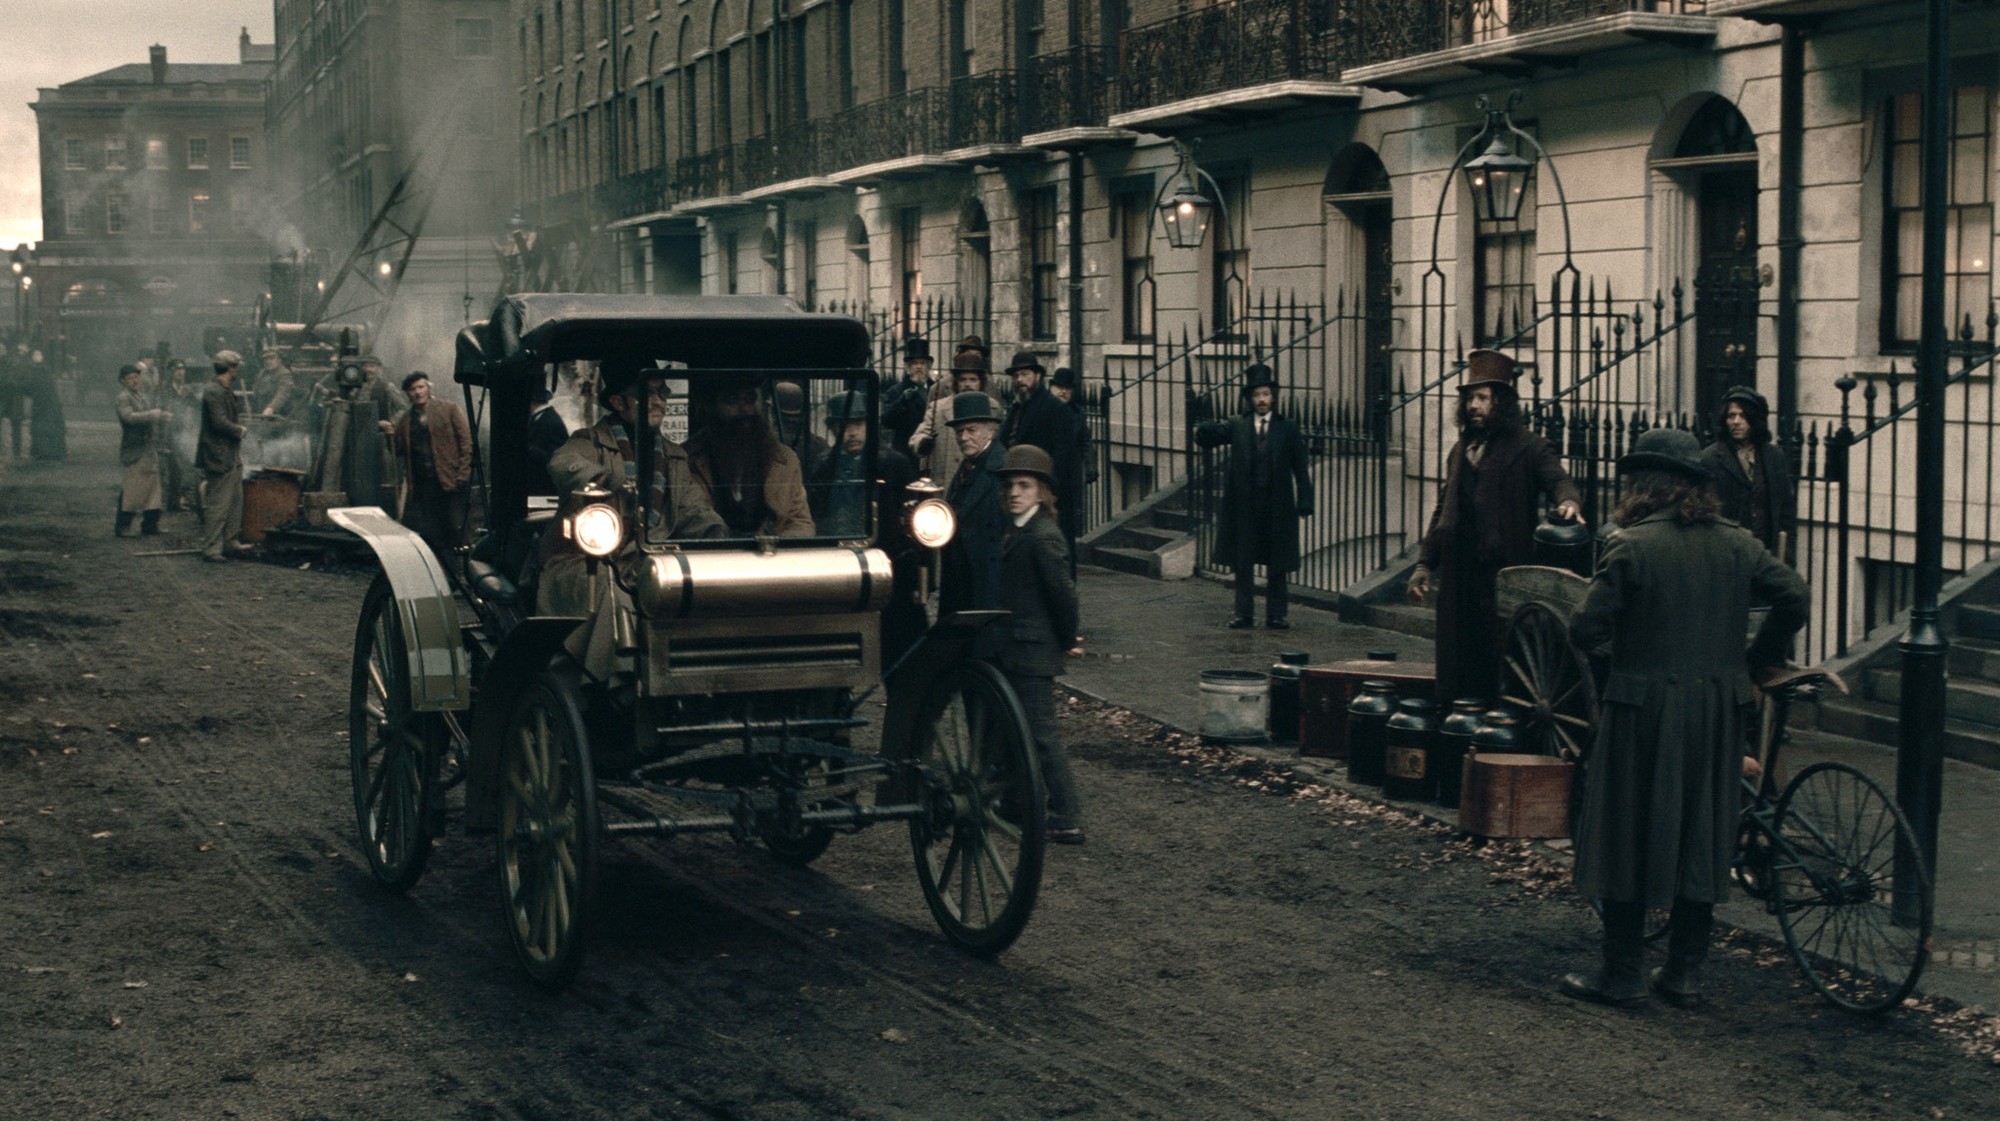 A scene from Warner Bros. Pictures' Sherlock Holmes: A Game of Shadows (2011)